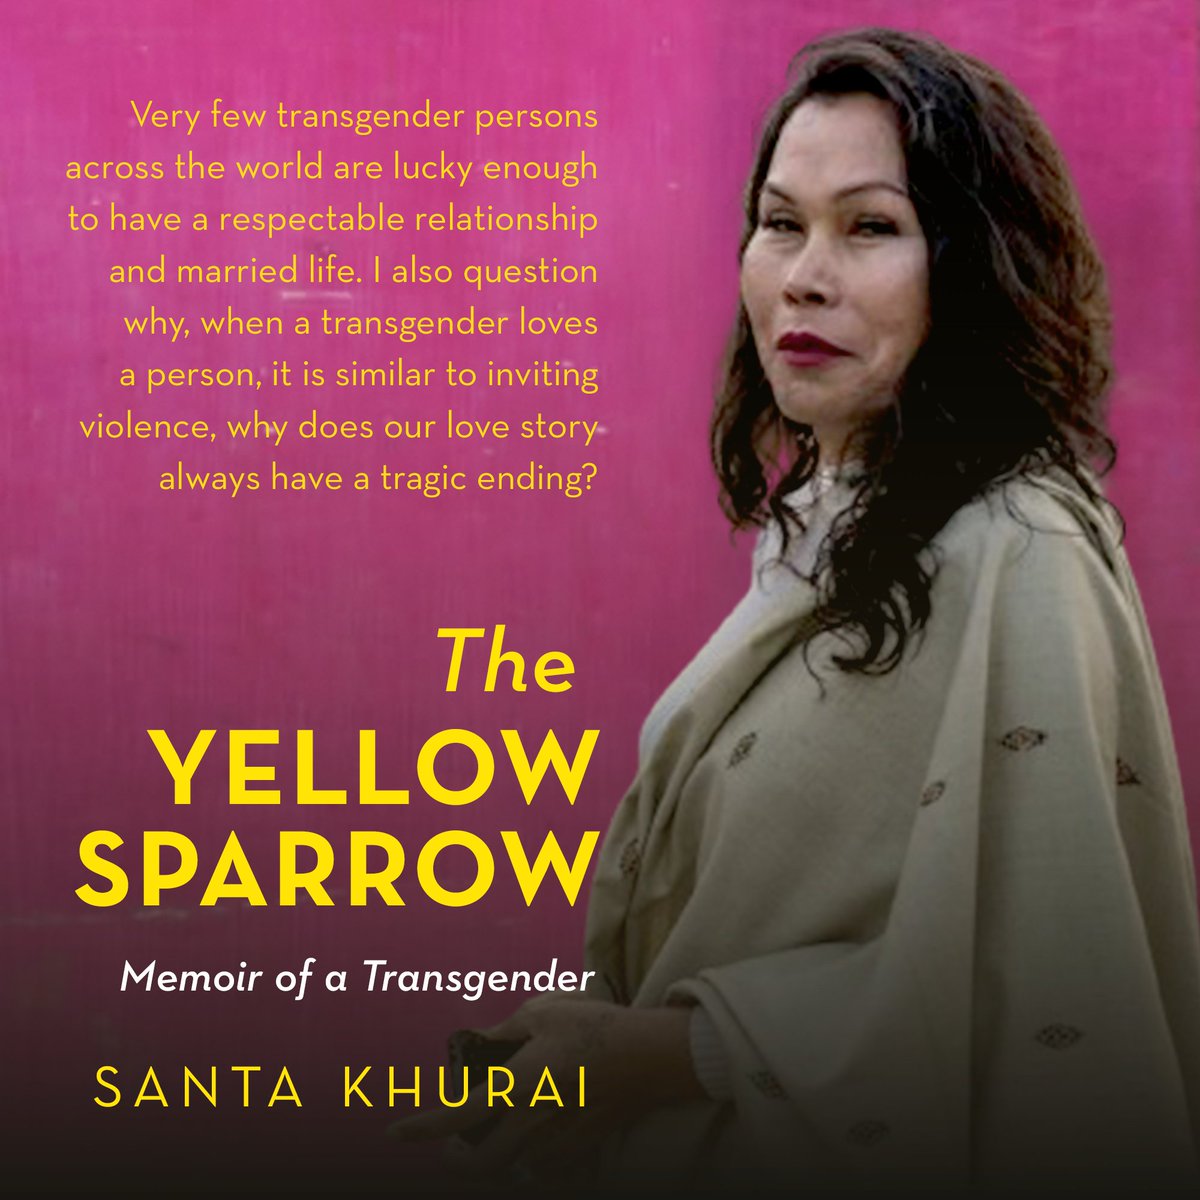 '​The Yellow Sparrow' is an immensely moving and human story about what it is like to live​ life as a transgender by one of India’s most well-known LGBTQ​ activists, @KhuraiSanta. Get your copy from a bookstore or online. #BookTwitter @HarperCollinsIN